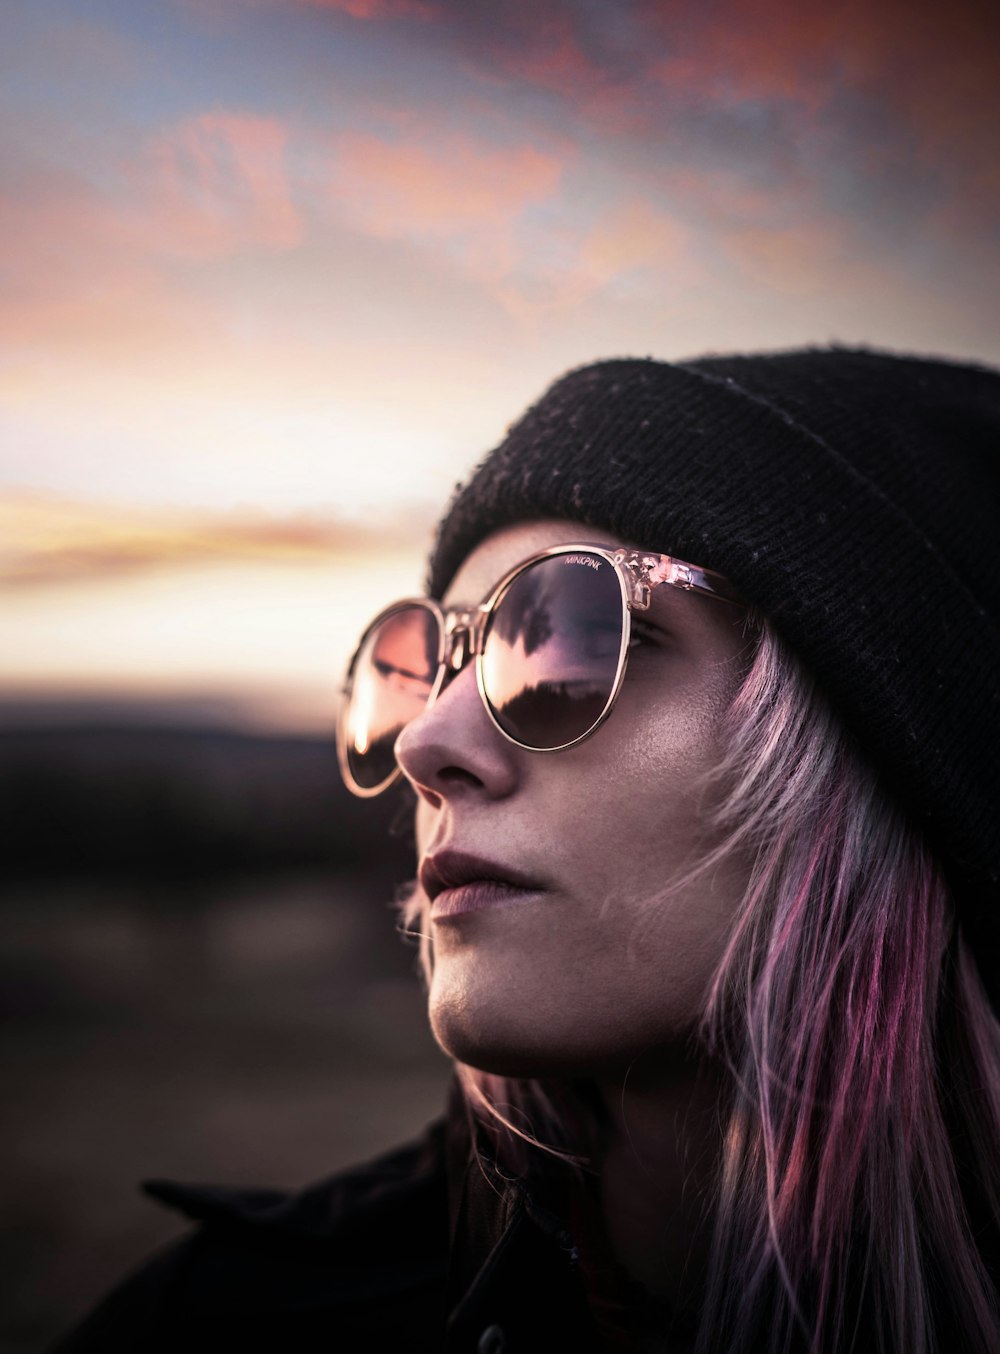 woman with black knit cap with sunglasses